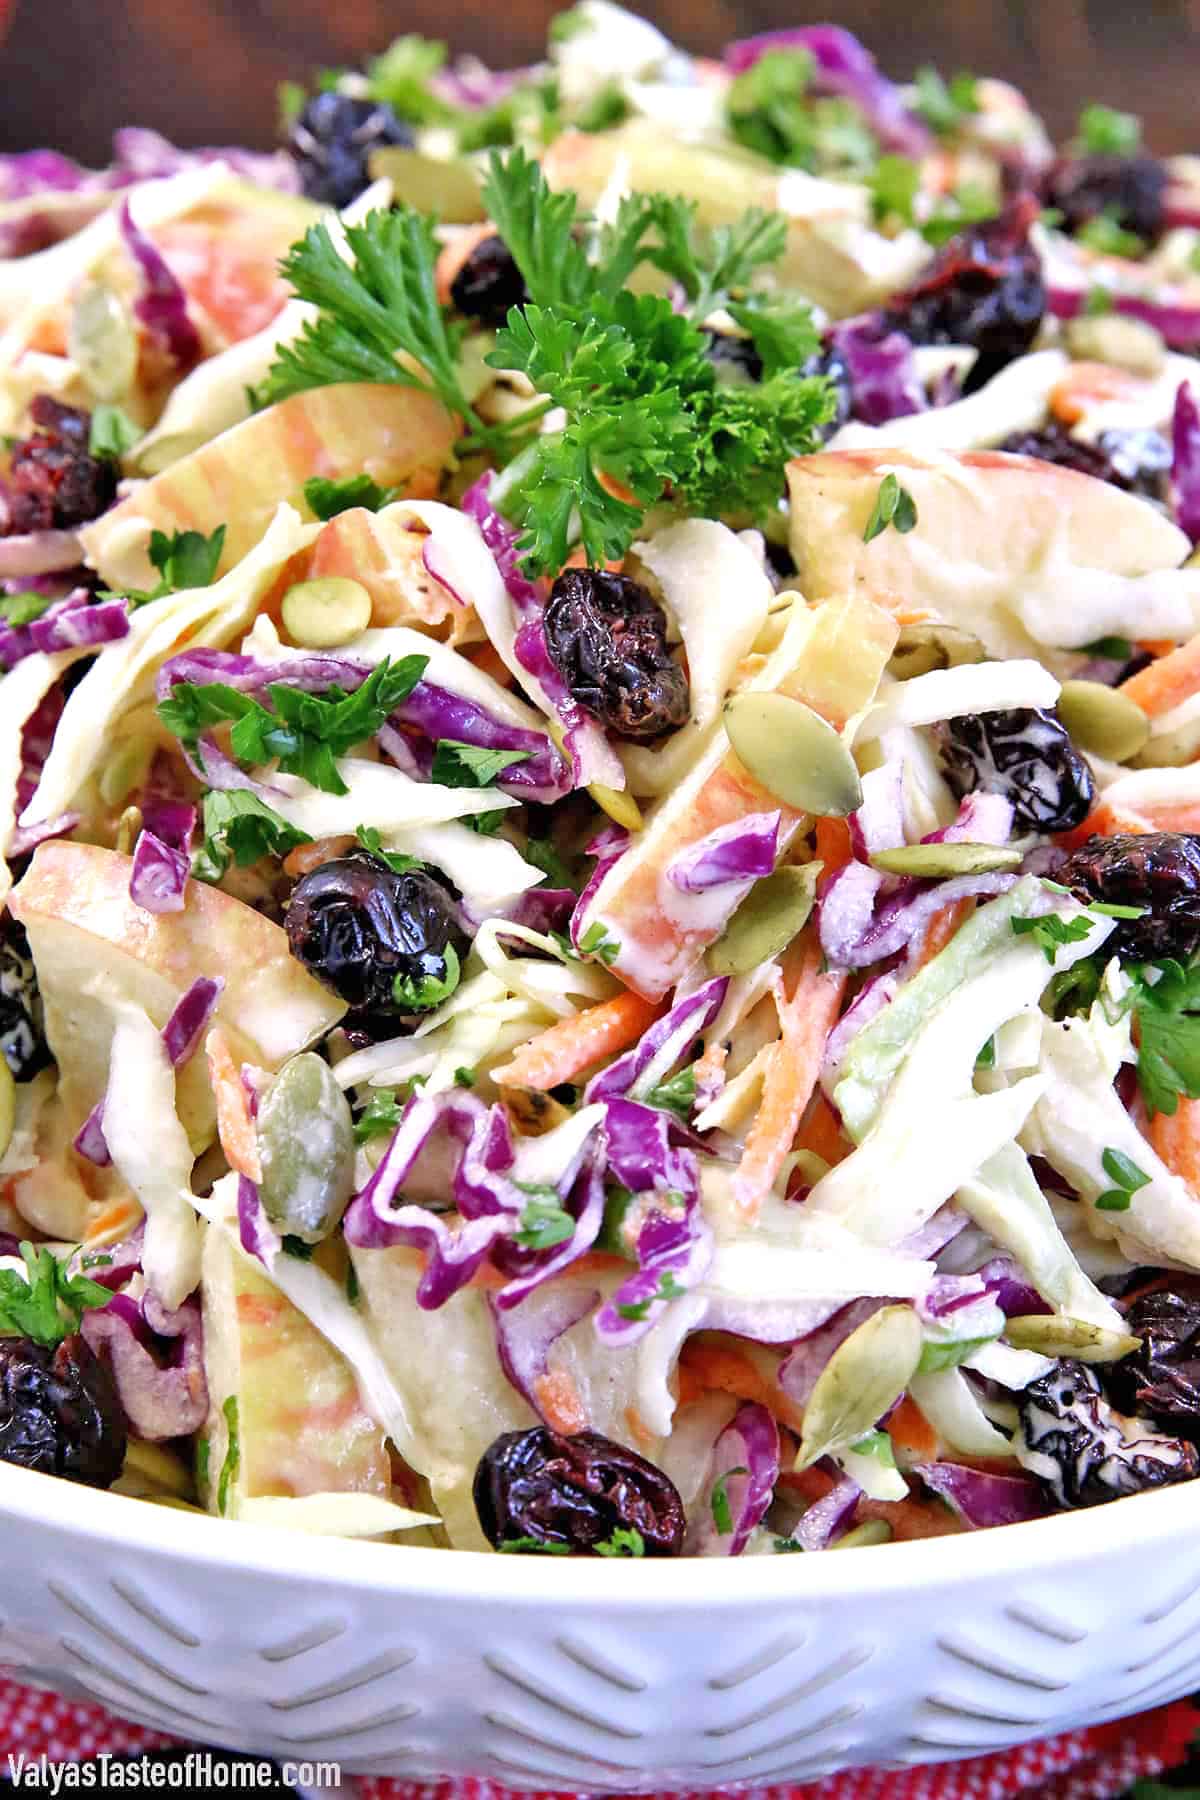 This Apple Cranberry Slaw is perfect for your holiday table. It's a crunchy, tangy, sweet side that goes well with everything and can even be made ahead!